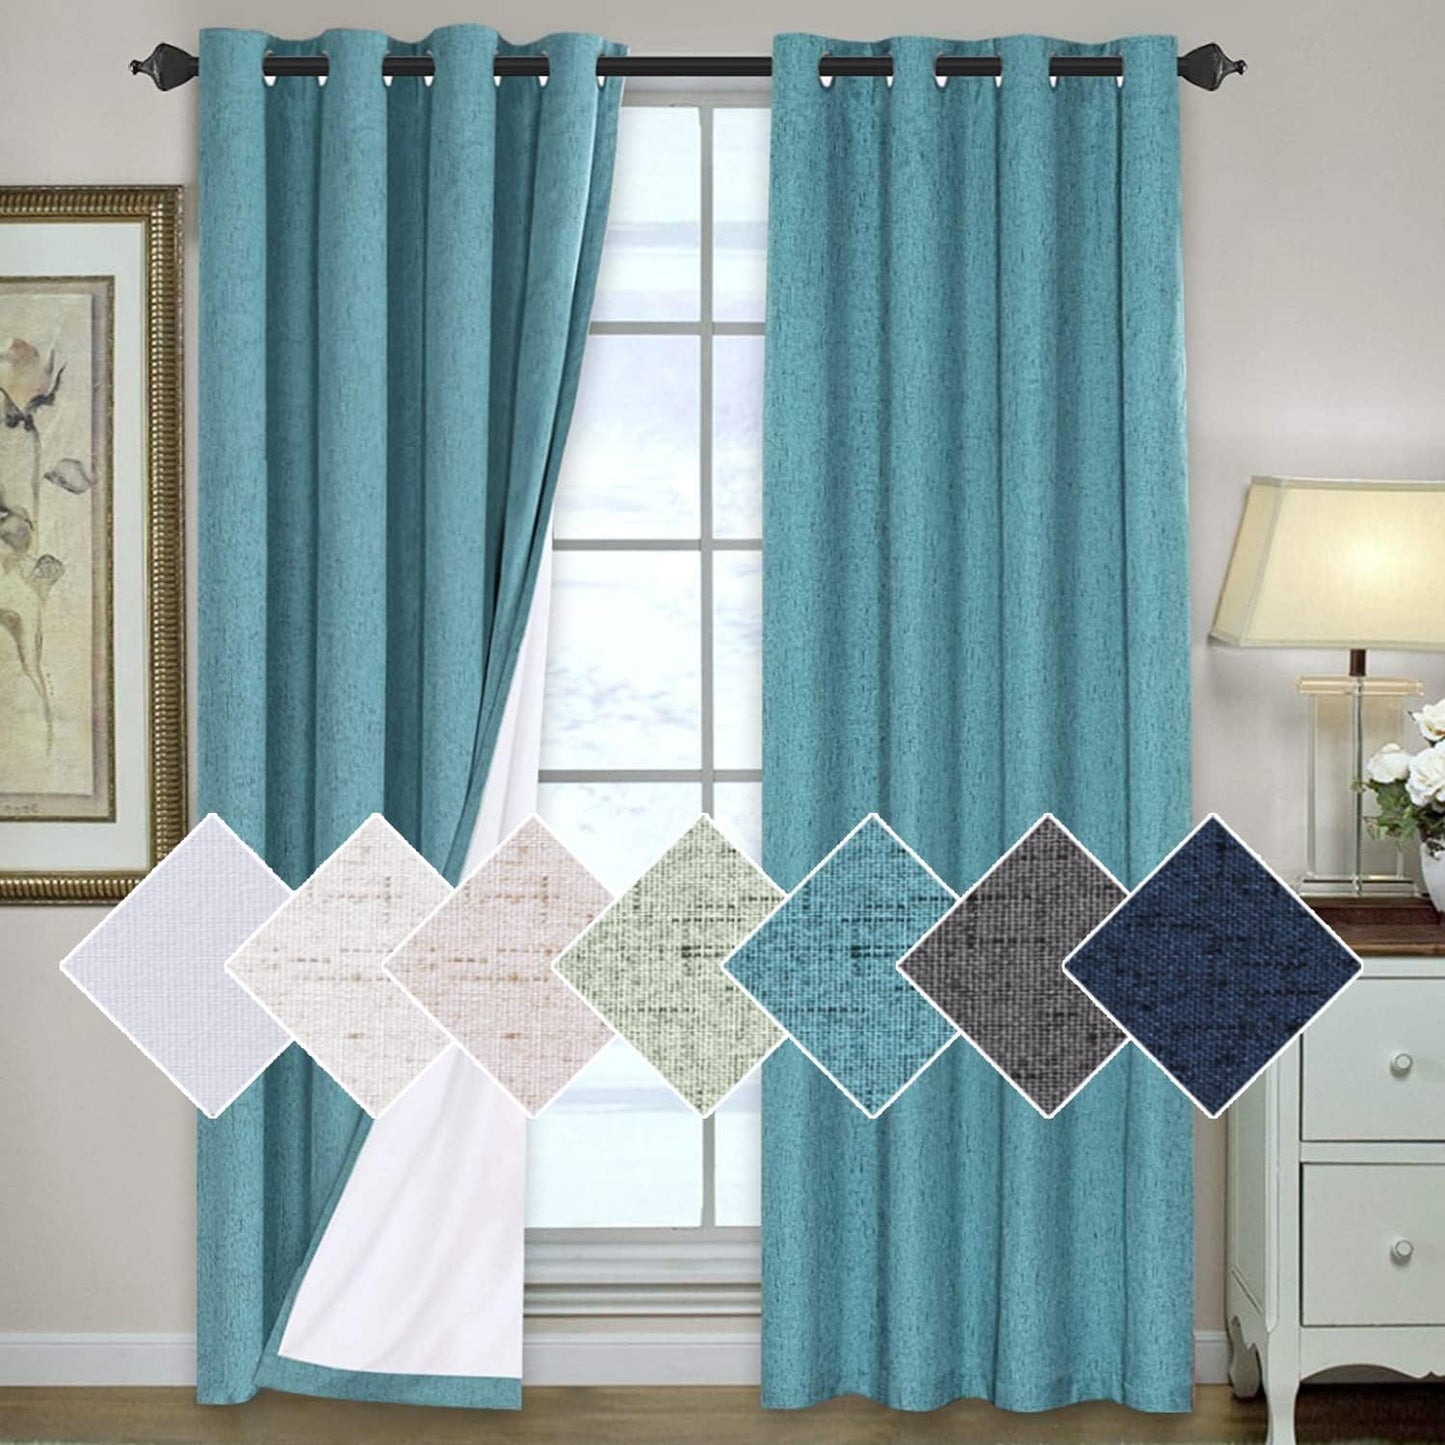 H.VERSAILTEX 100% Blackout Curtains for Bedroom Thermal Insulated Linen Textured Curtains Heat and Full Light Blocking Drapes Living Room Curtains 2 Panel Sets, 52X84 - Inch, Natural  H.VERSAILTEX Teal Blue 2 Panel - 52"W X 108"L 